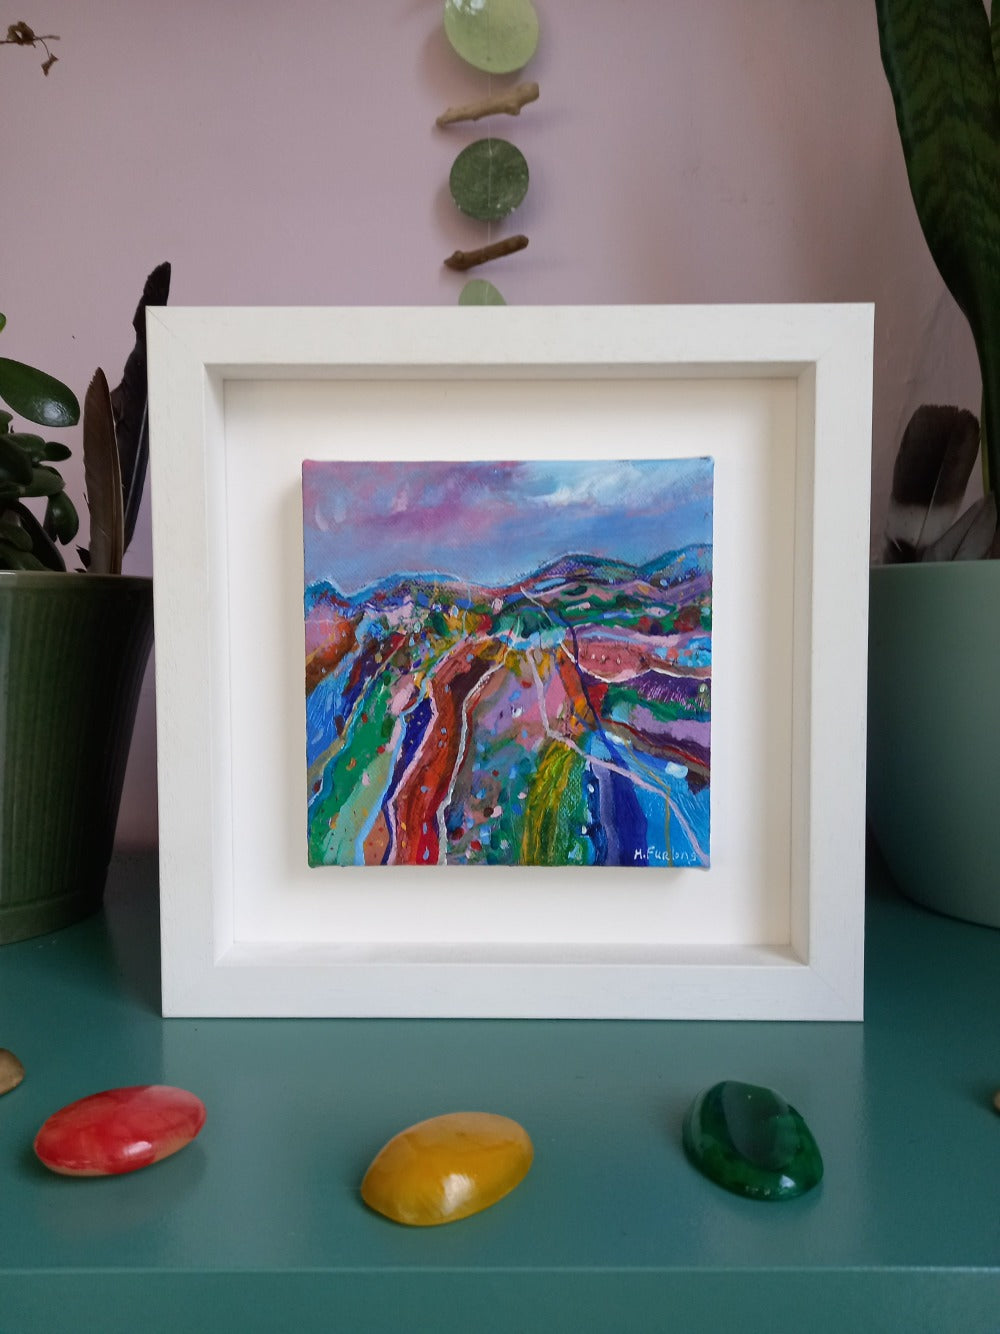 Colouful abstract landscape framed by Martina Furlong artist